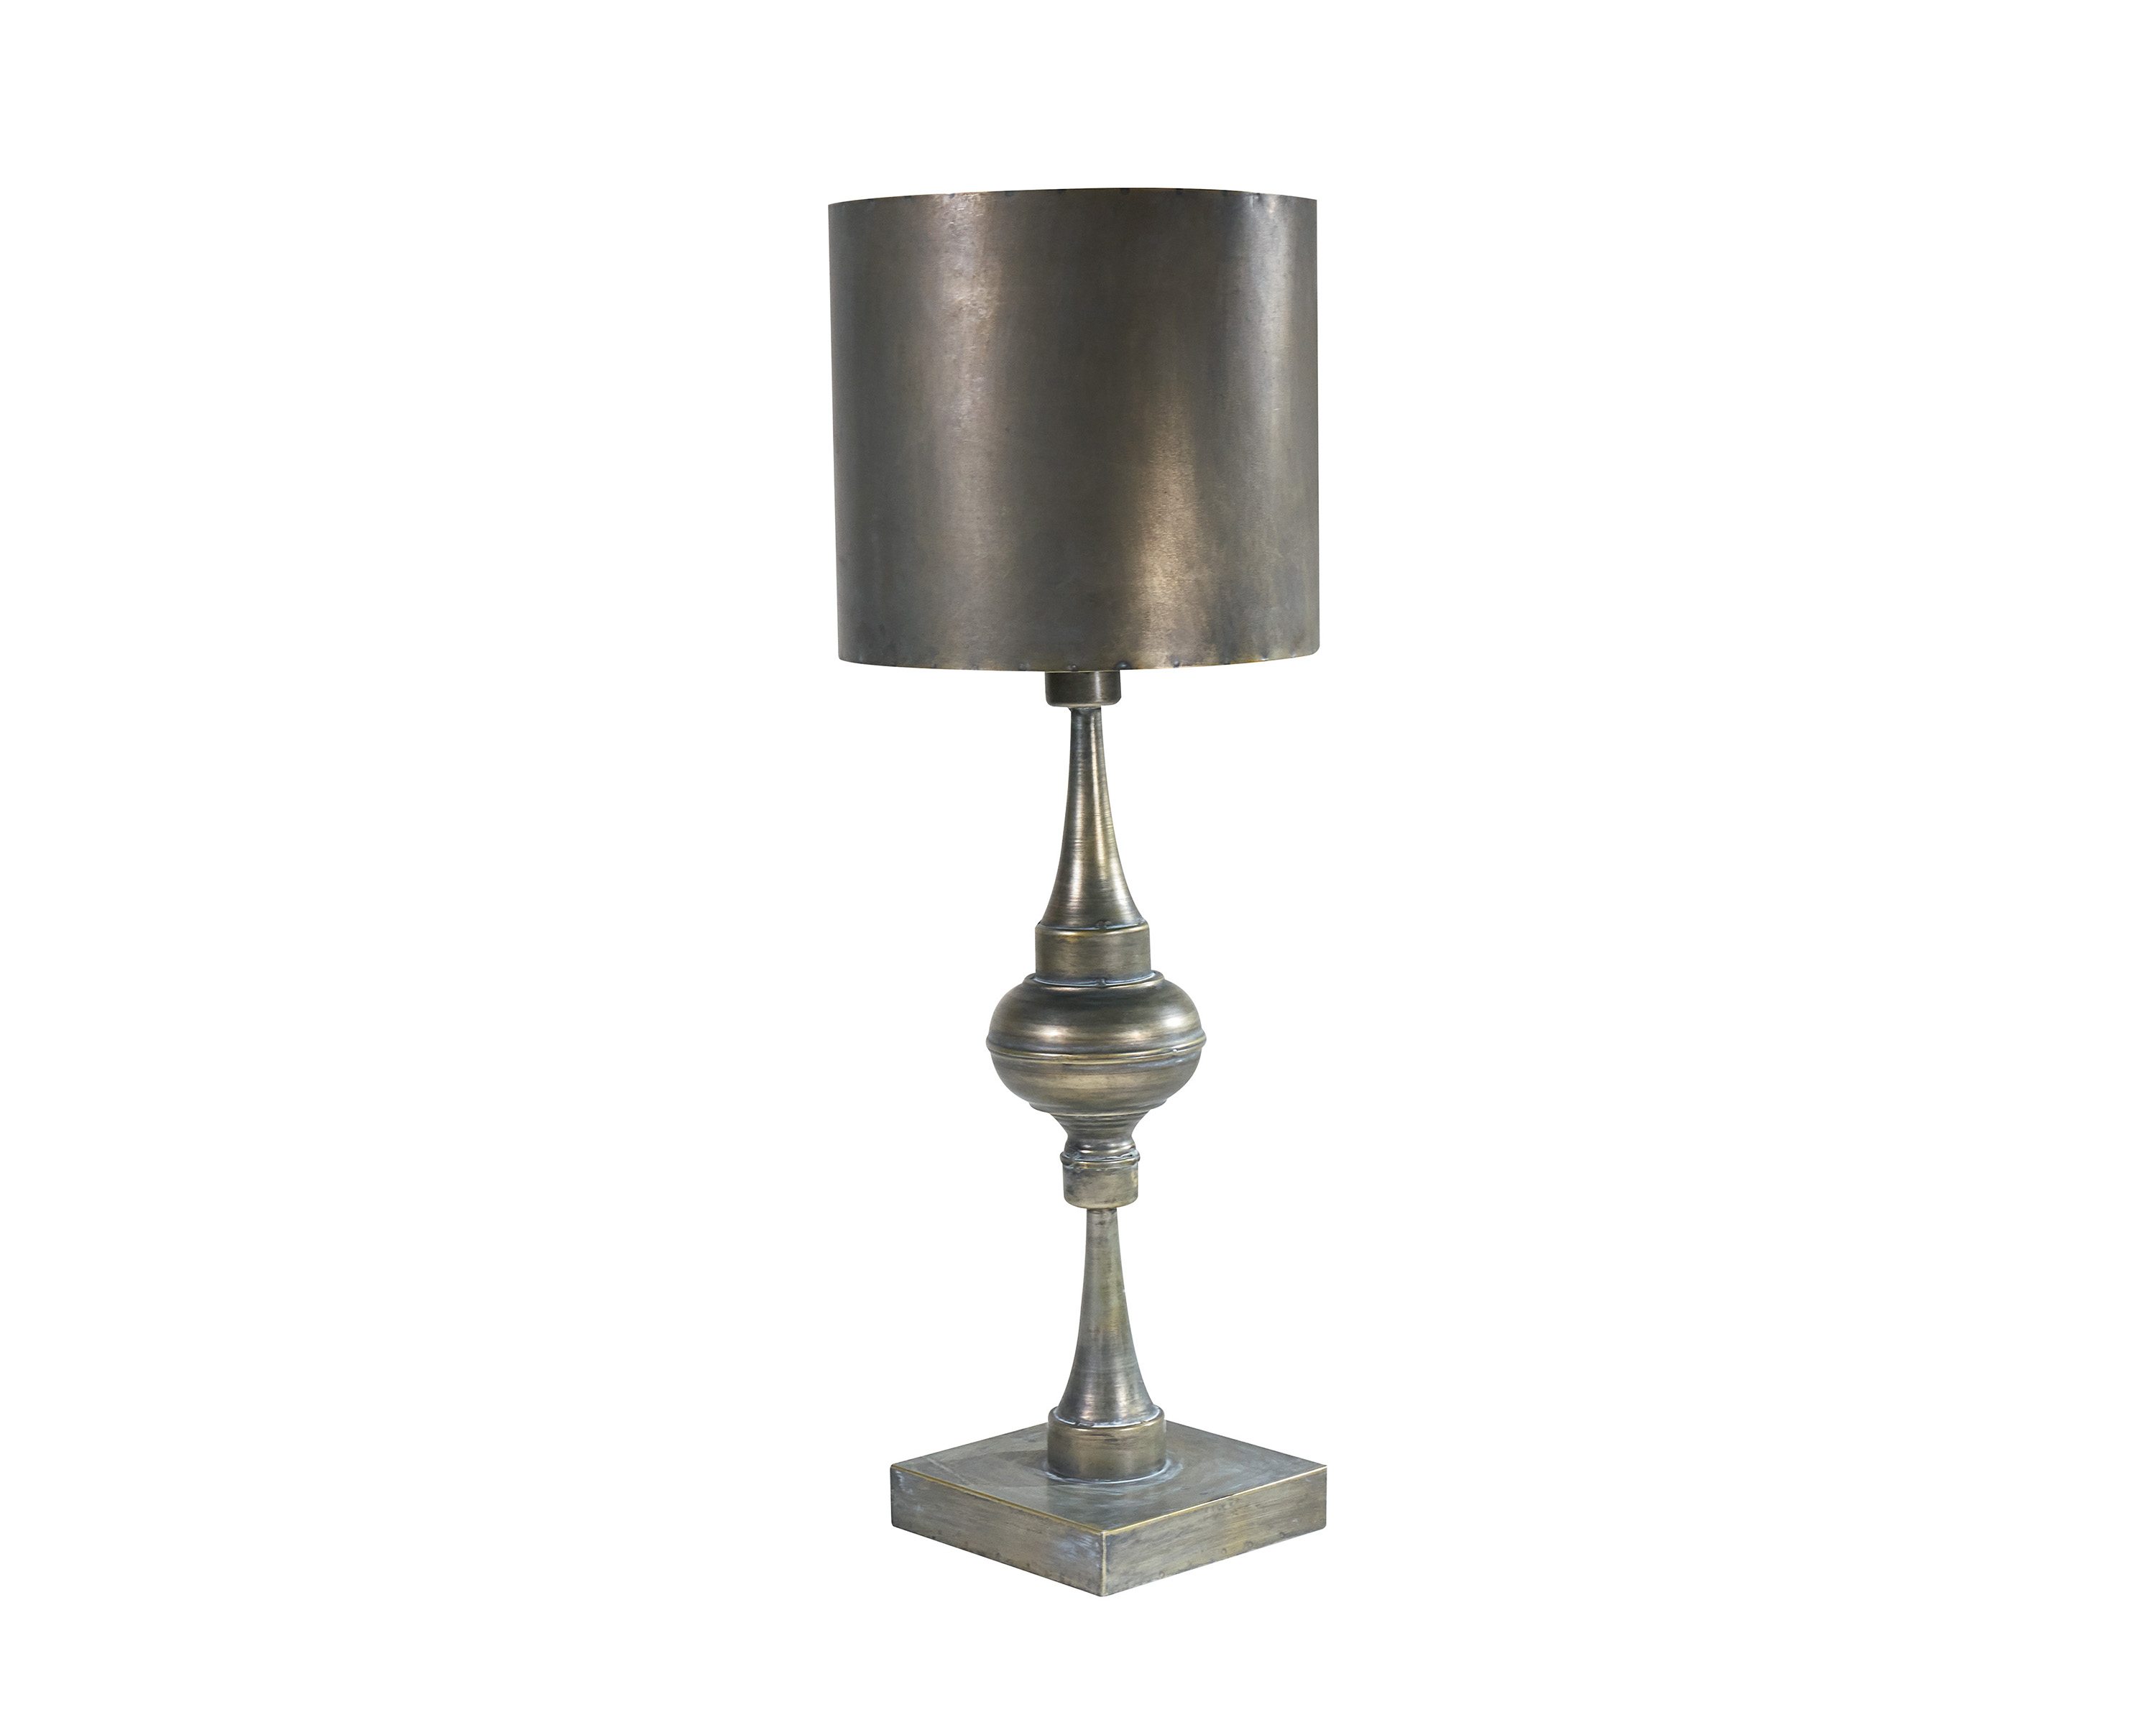 metal ore table lamp magnolia home silo accent light your room with our contemporary styled featuring distressed finish and modern ball the matching shade winsome timmy black wood